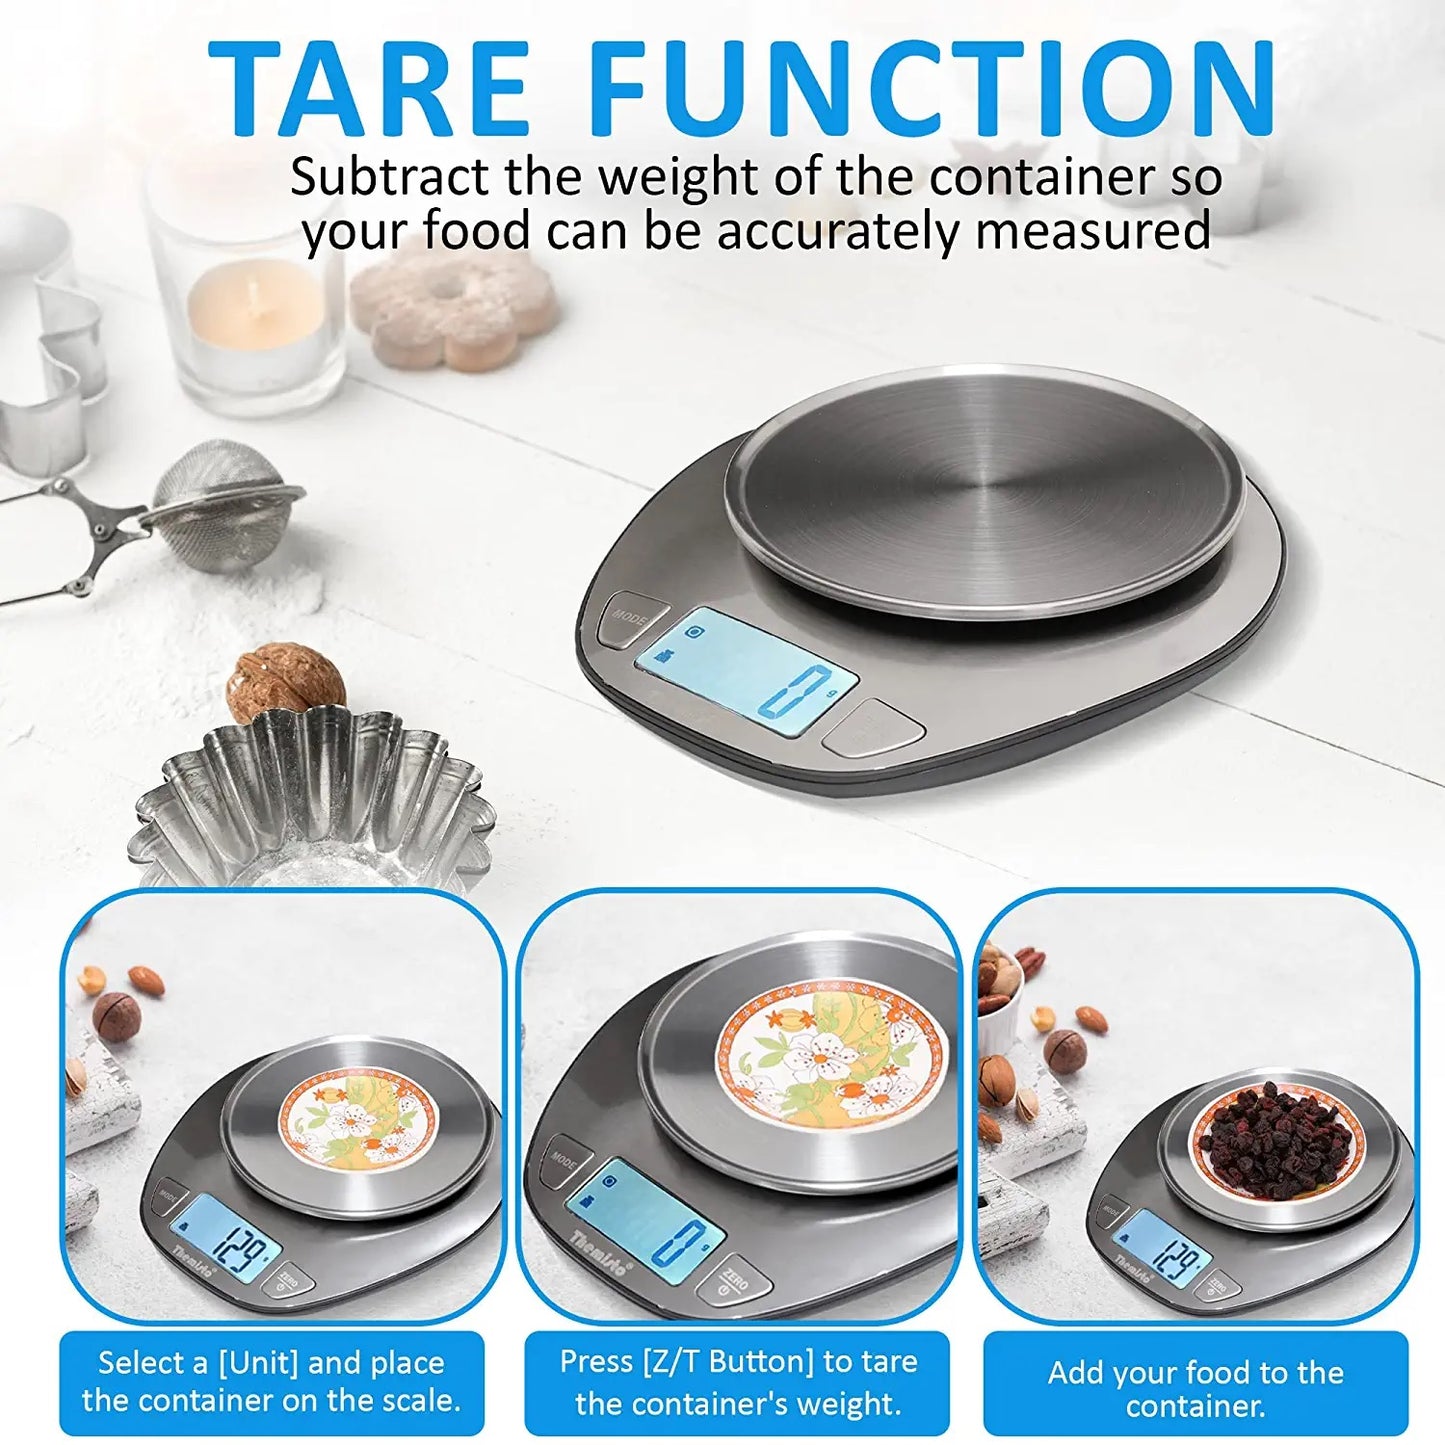 Themisto TH-WS20 Digital Kitchen Weighing Scale Stainless Steel (5Kg)